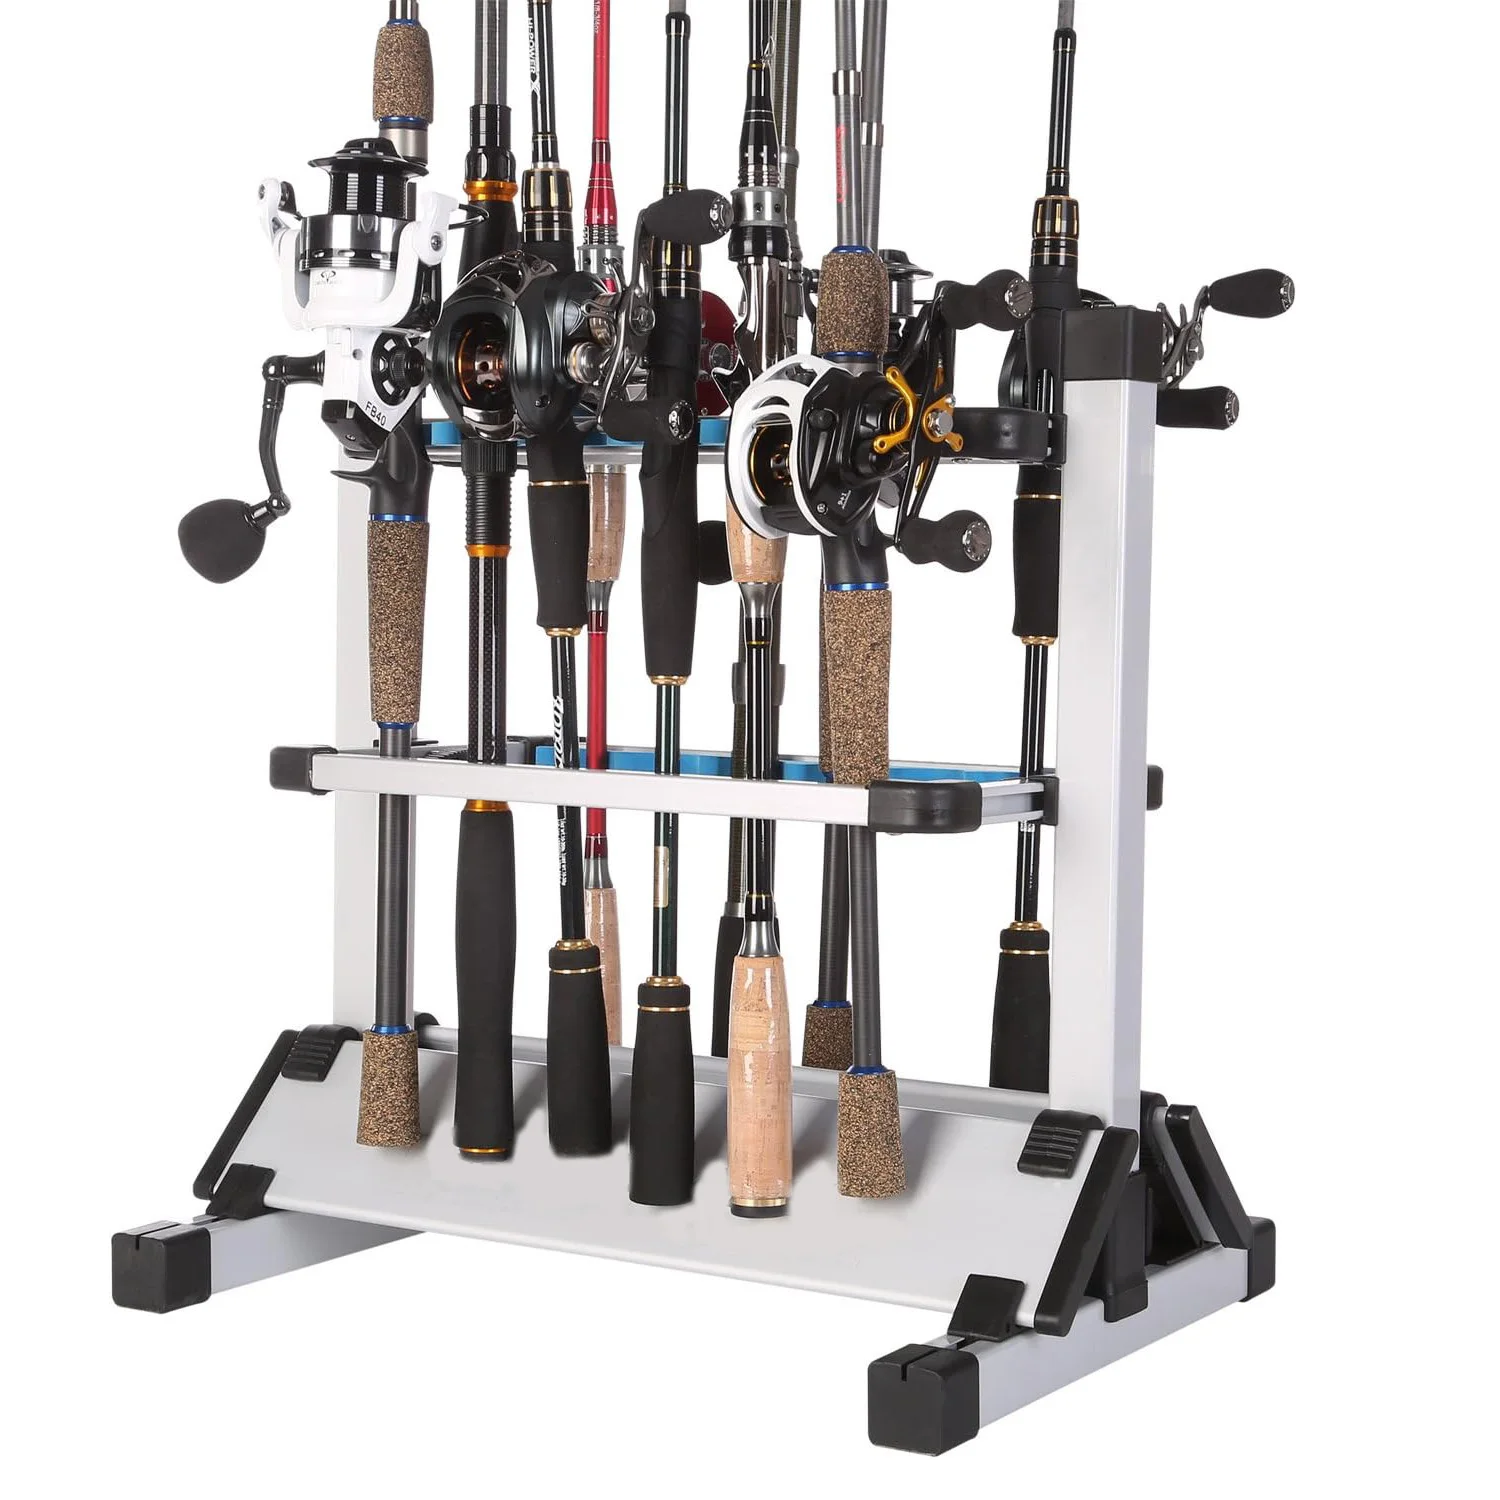 New Fishing Rod Storage Rack 12 Holes Holder Competitive Fishing Fish Pole  Floor Stand for Outdoor Tackle Fishing Accessory Tool - AliExpress